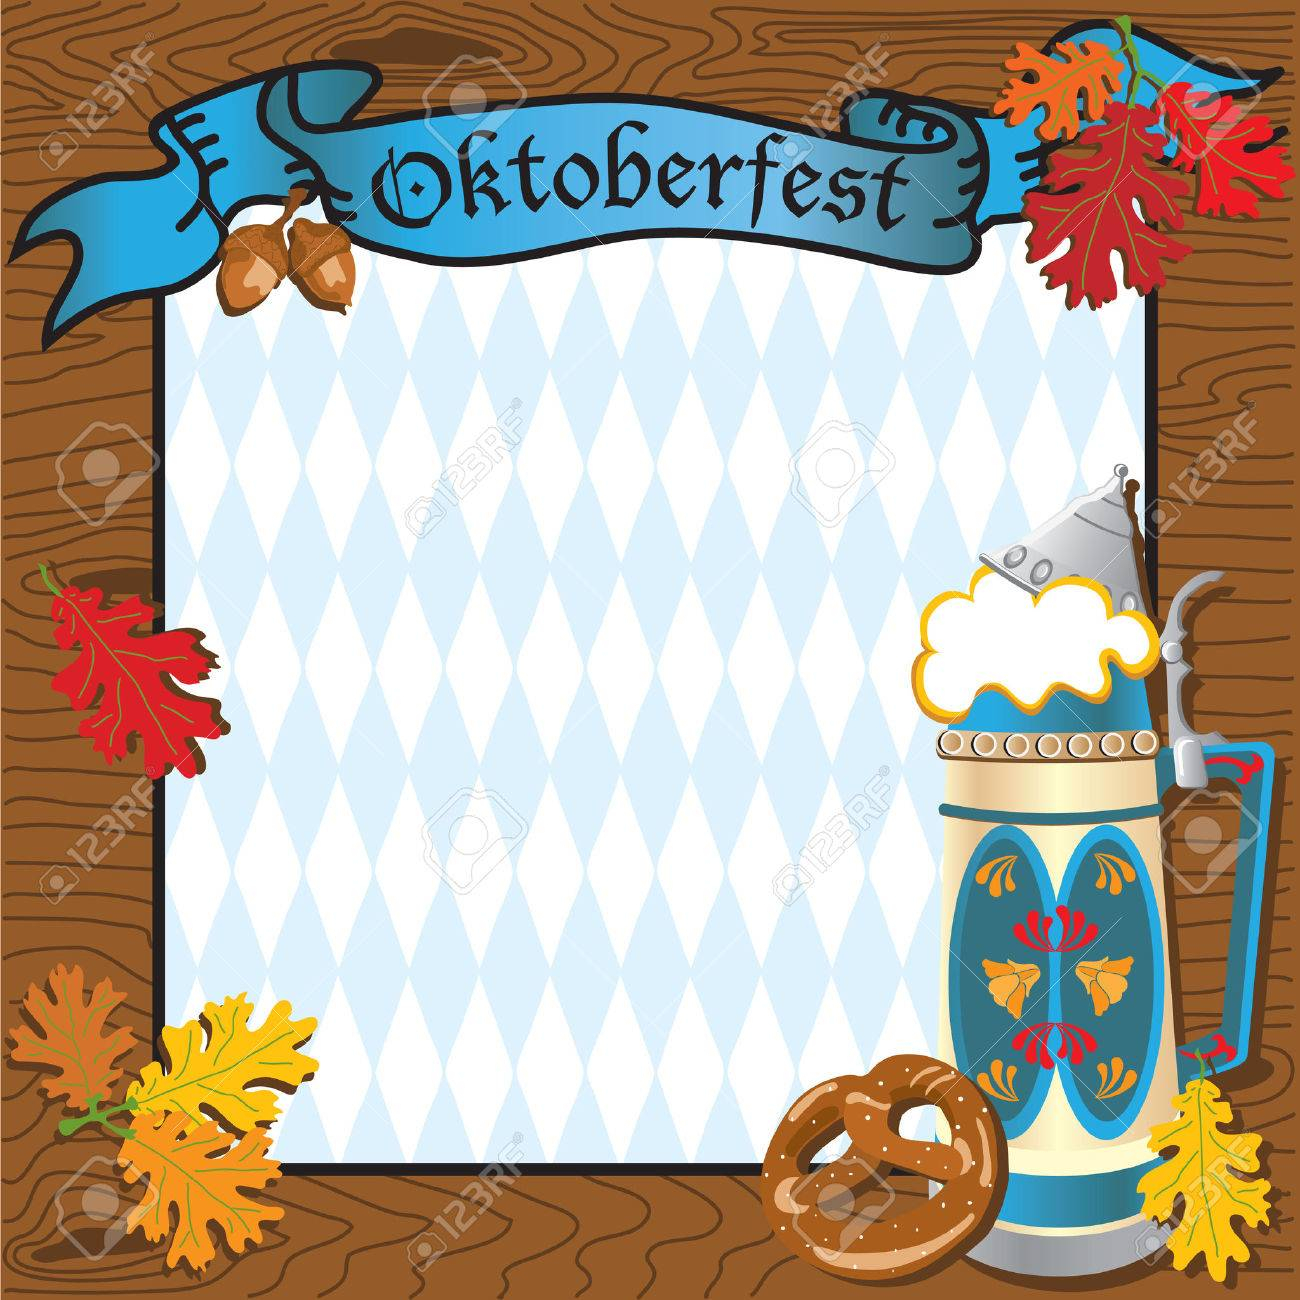 Oktoberfest Party Invitation Royalty Free Cliparts Vectors And intended for dimensions 1300 X 1300